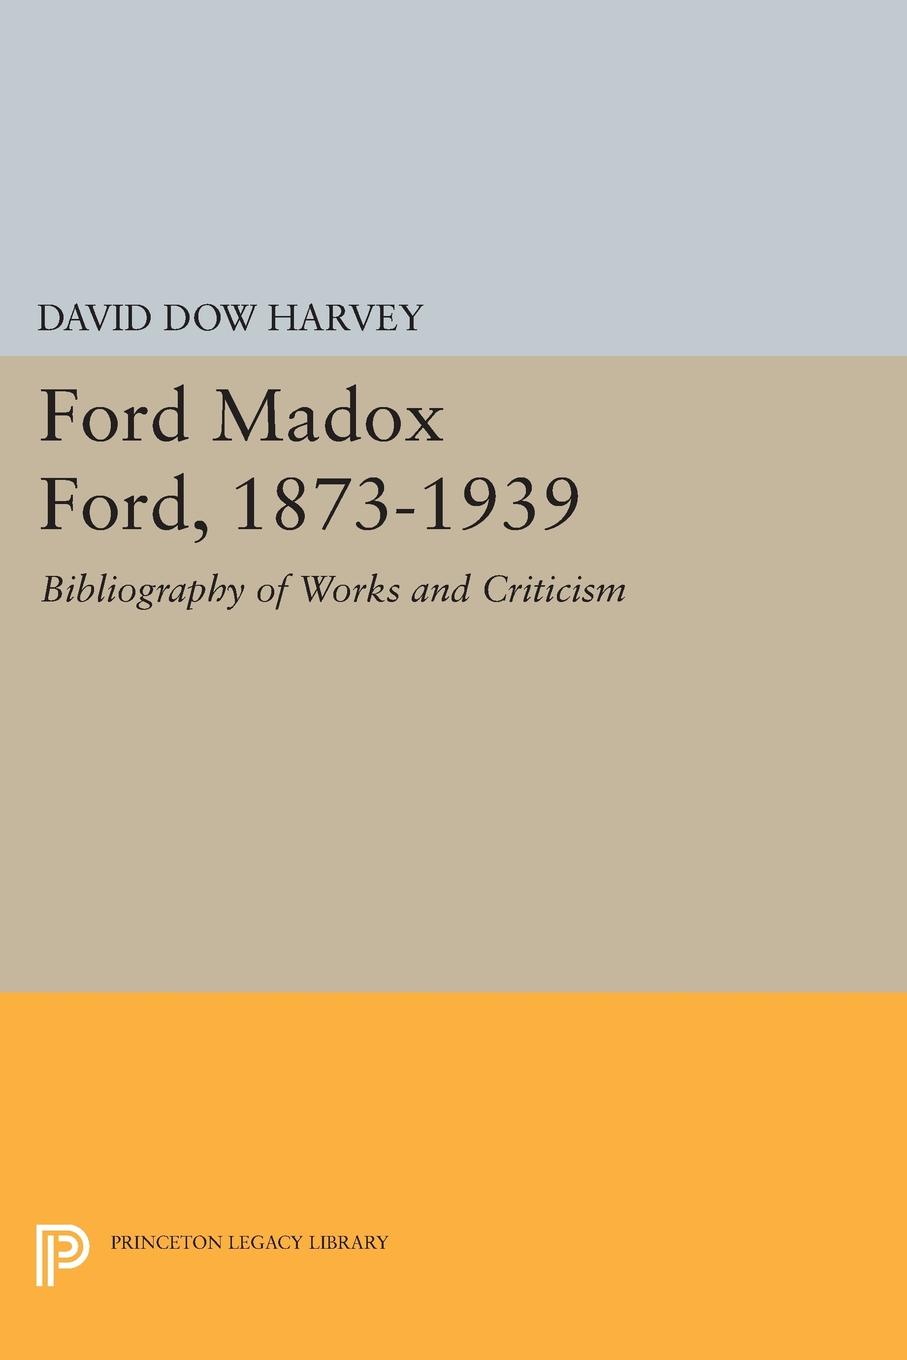 Ford Madox Ford, 1873-1939. Bibliography of Works and Criticism